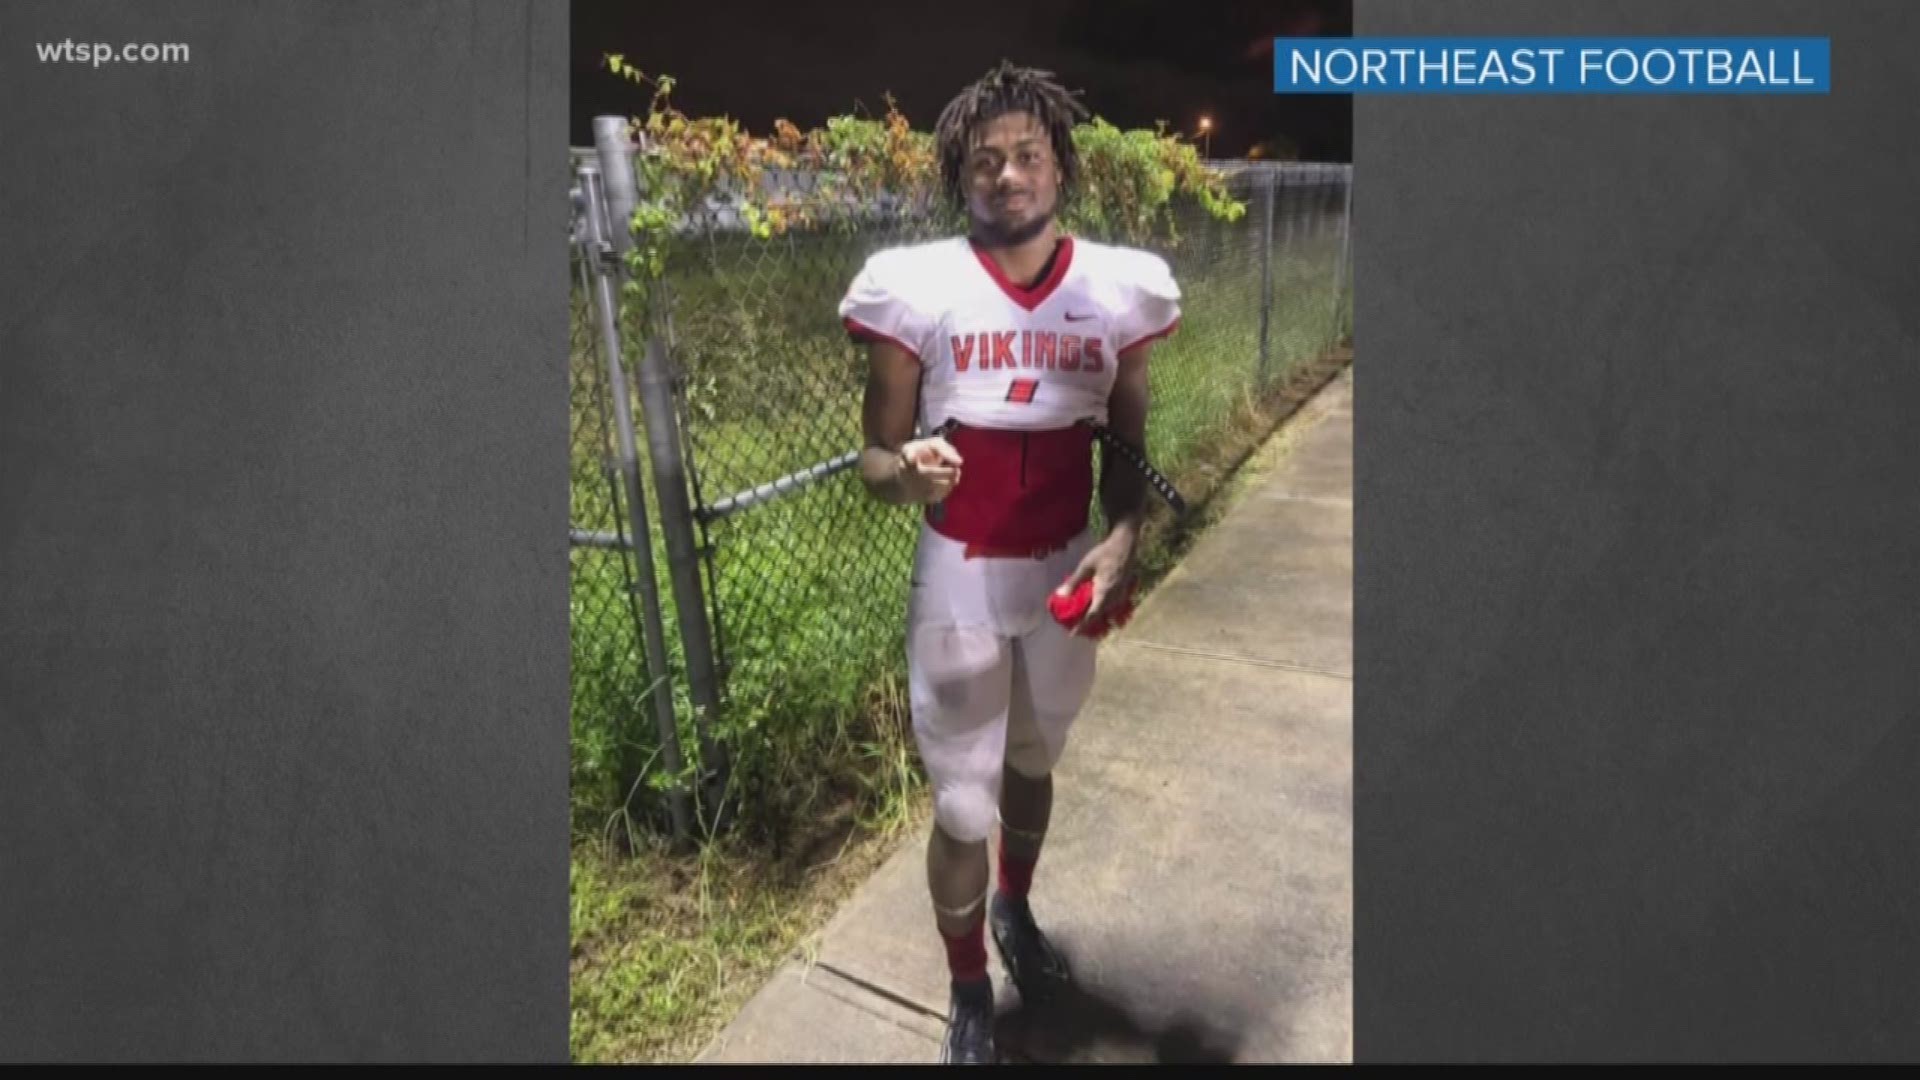 The organs of Jacquez Welch, the Northeast High School football captain who collapsed during a game Friday night, will be donated to people who need them.